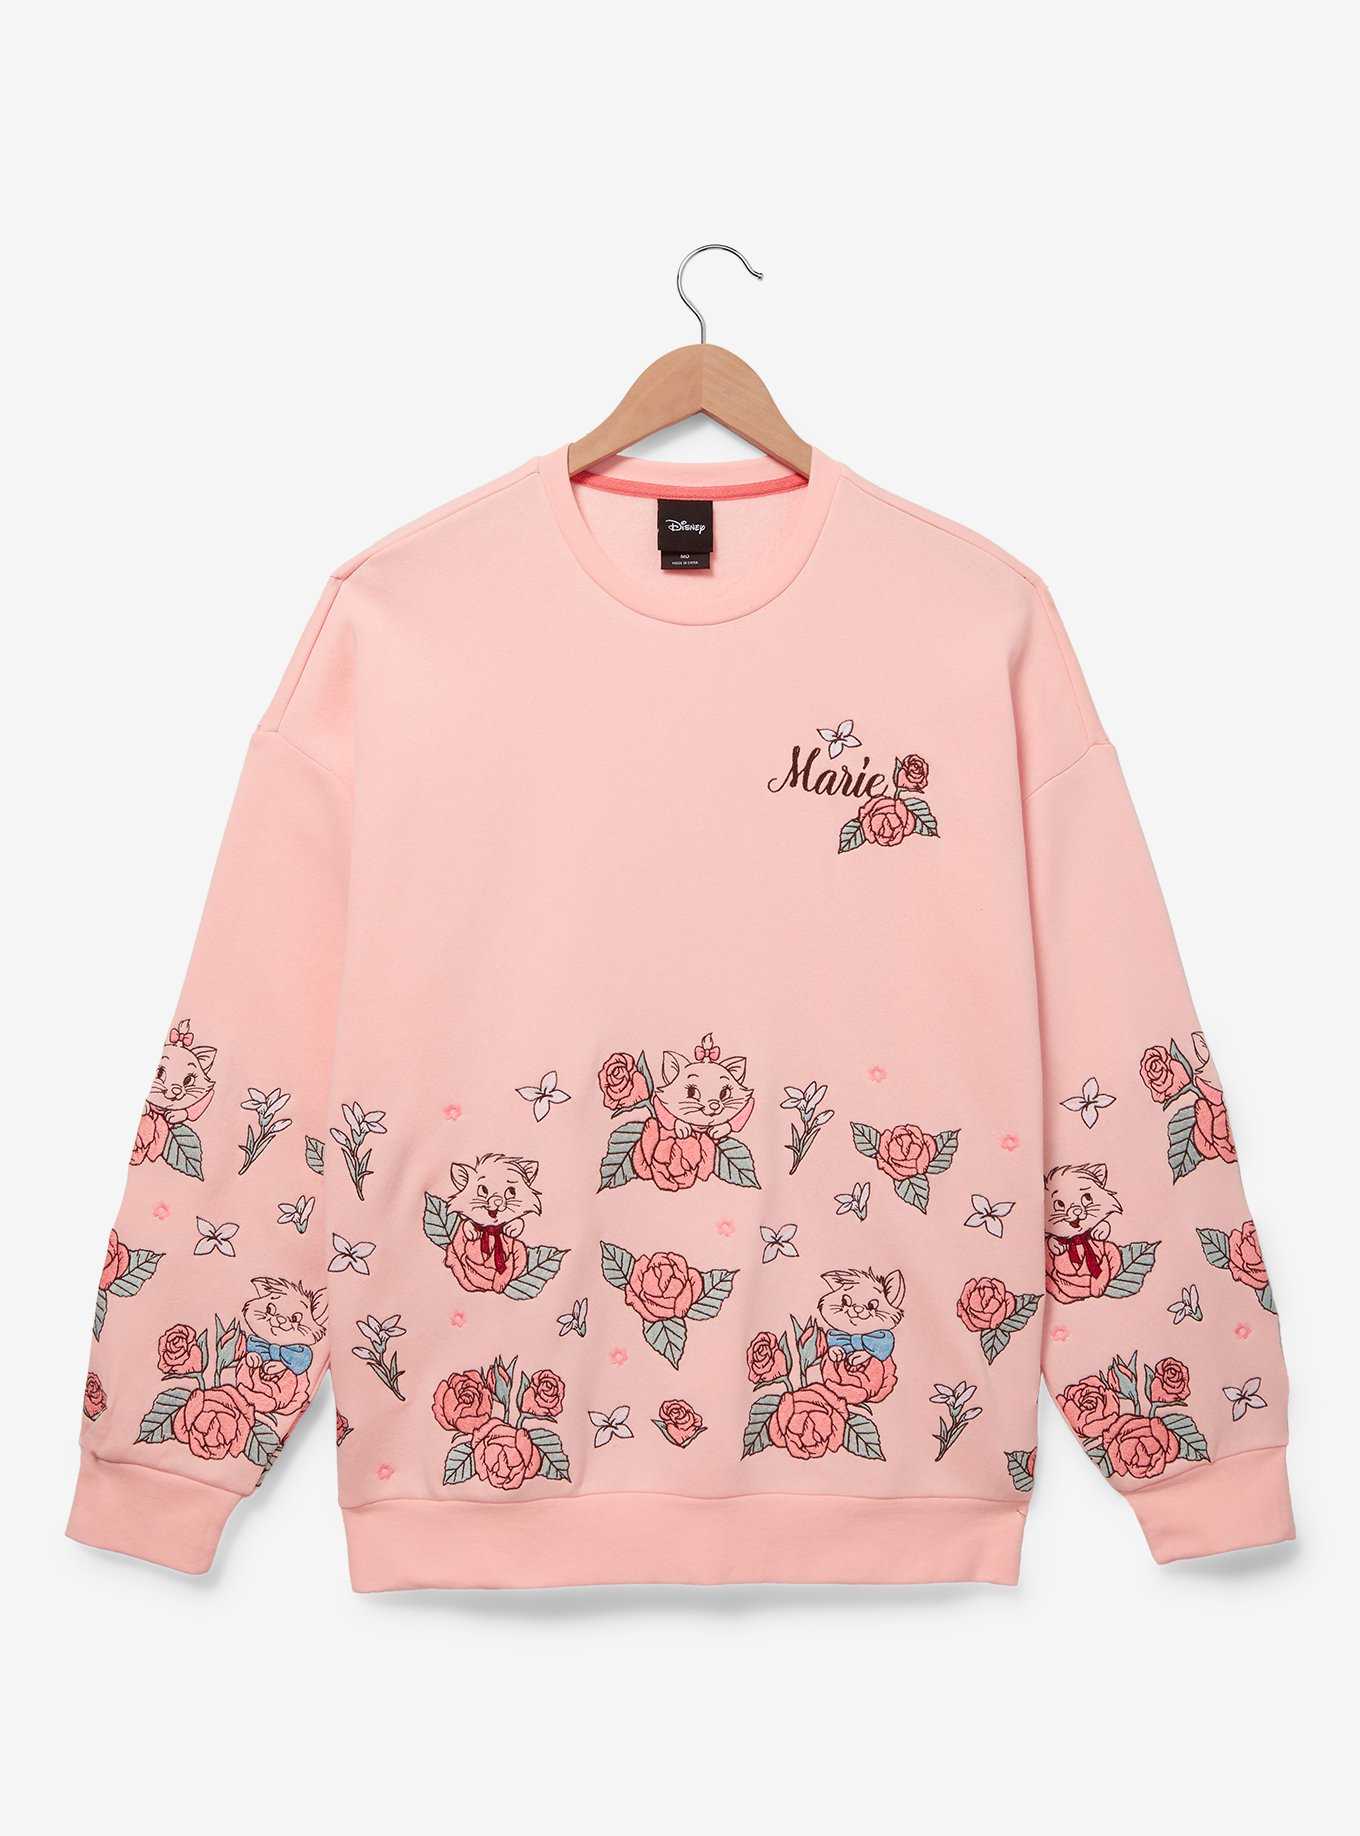 & Boxlunch The | Gifts Aristocats Merchandise Shirts, OFFICIAL